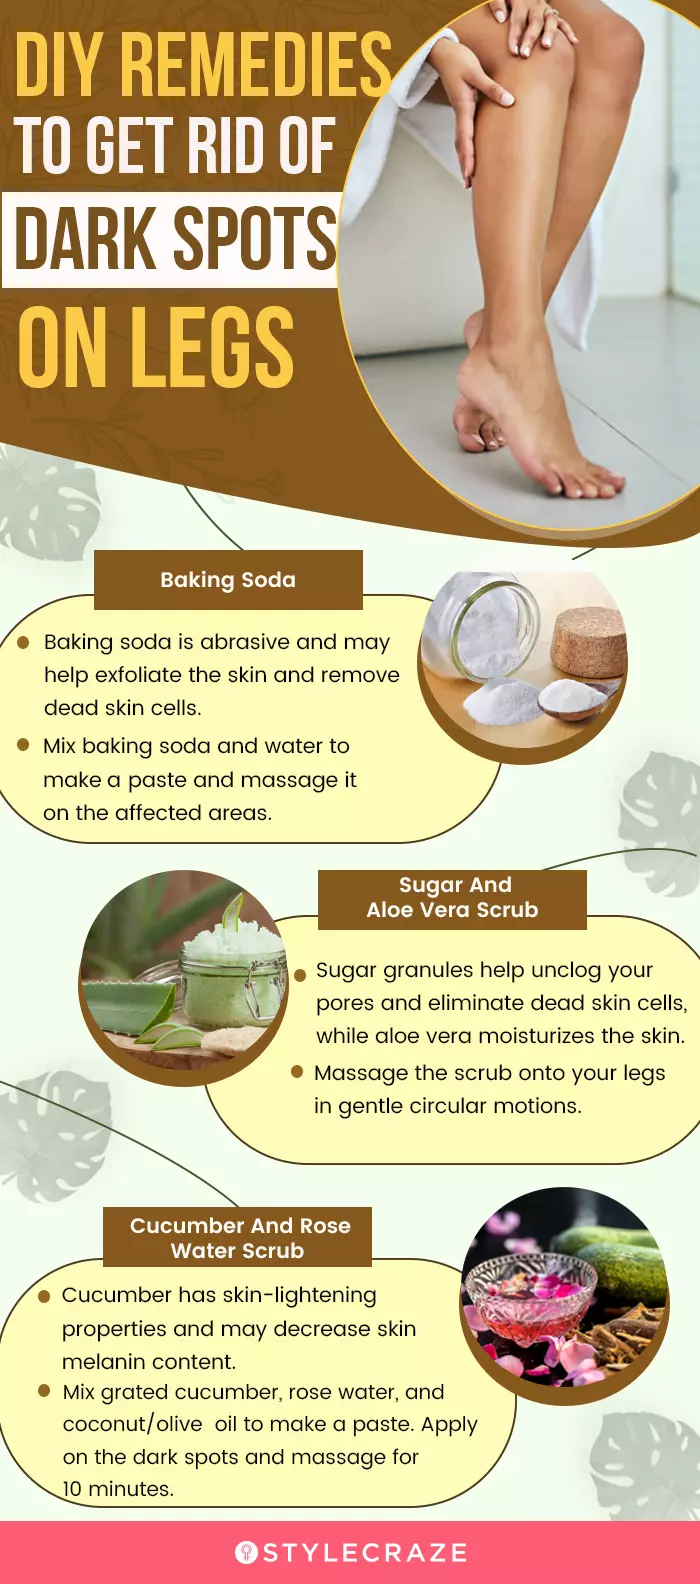 diy remedies to get rid of dark spots on legs (infographic)